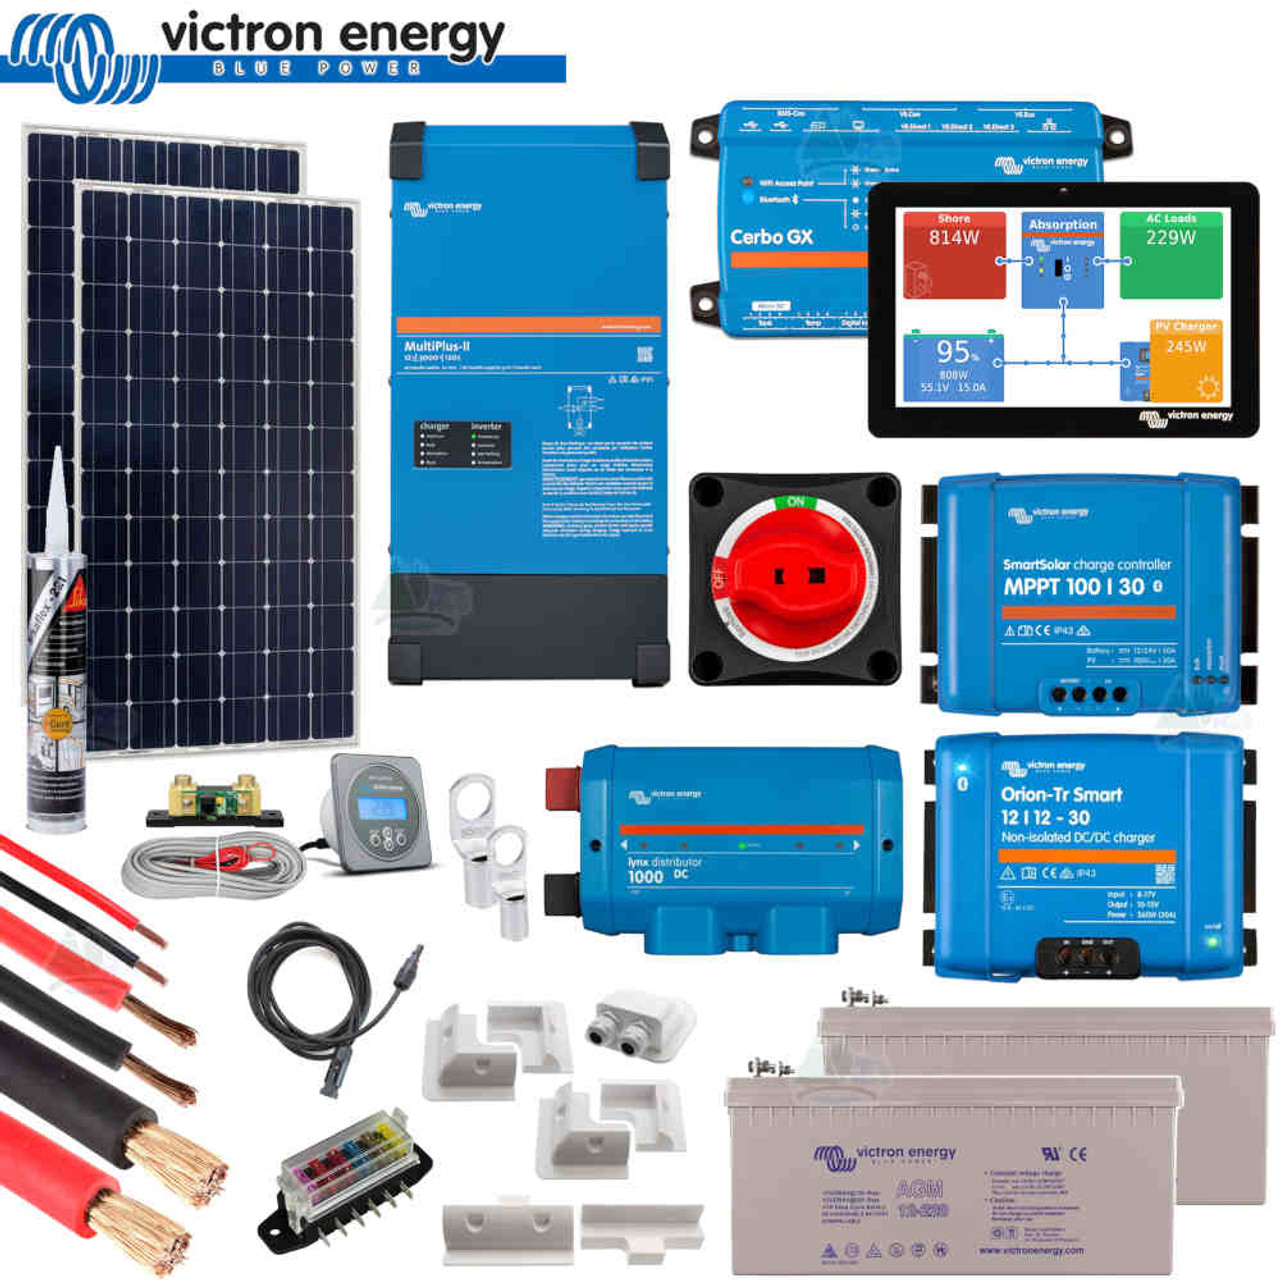 Victron 350 Watt Solar Panel Kit with MPPT Controller, Multiplus II, Cerbo  GX and Fittings For Caravan Motorhome Marine use